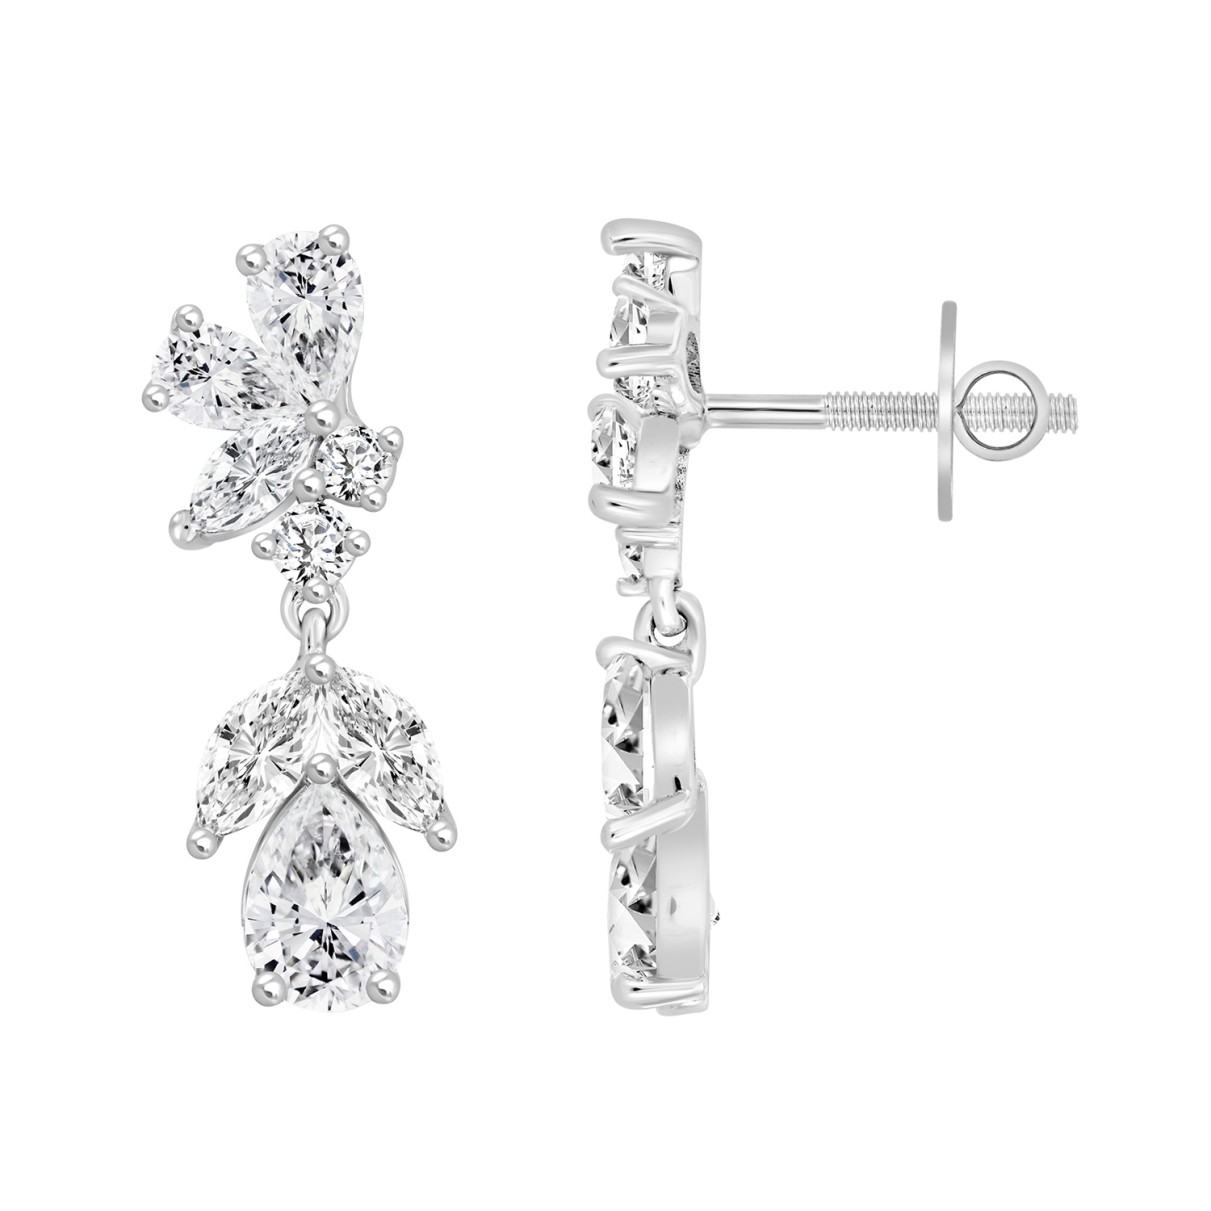 LADIES EARRINGS 4CT ROUND/MARQUISE/PEAR DIAMOND 14K WHITE GOLD